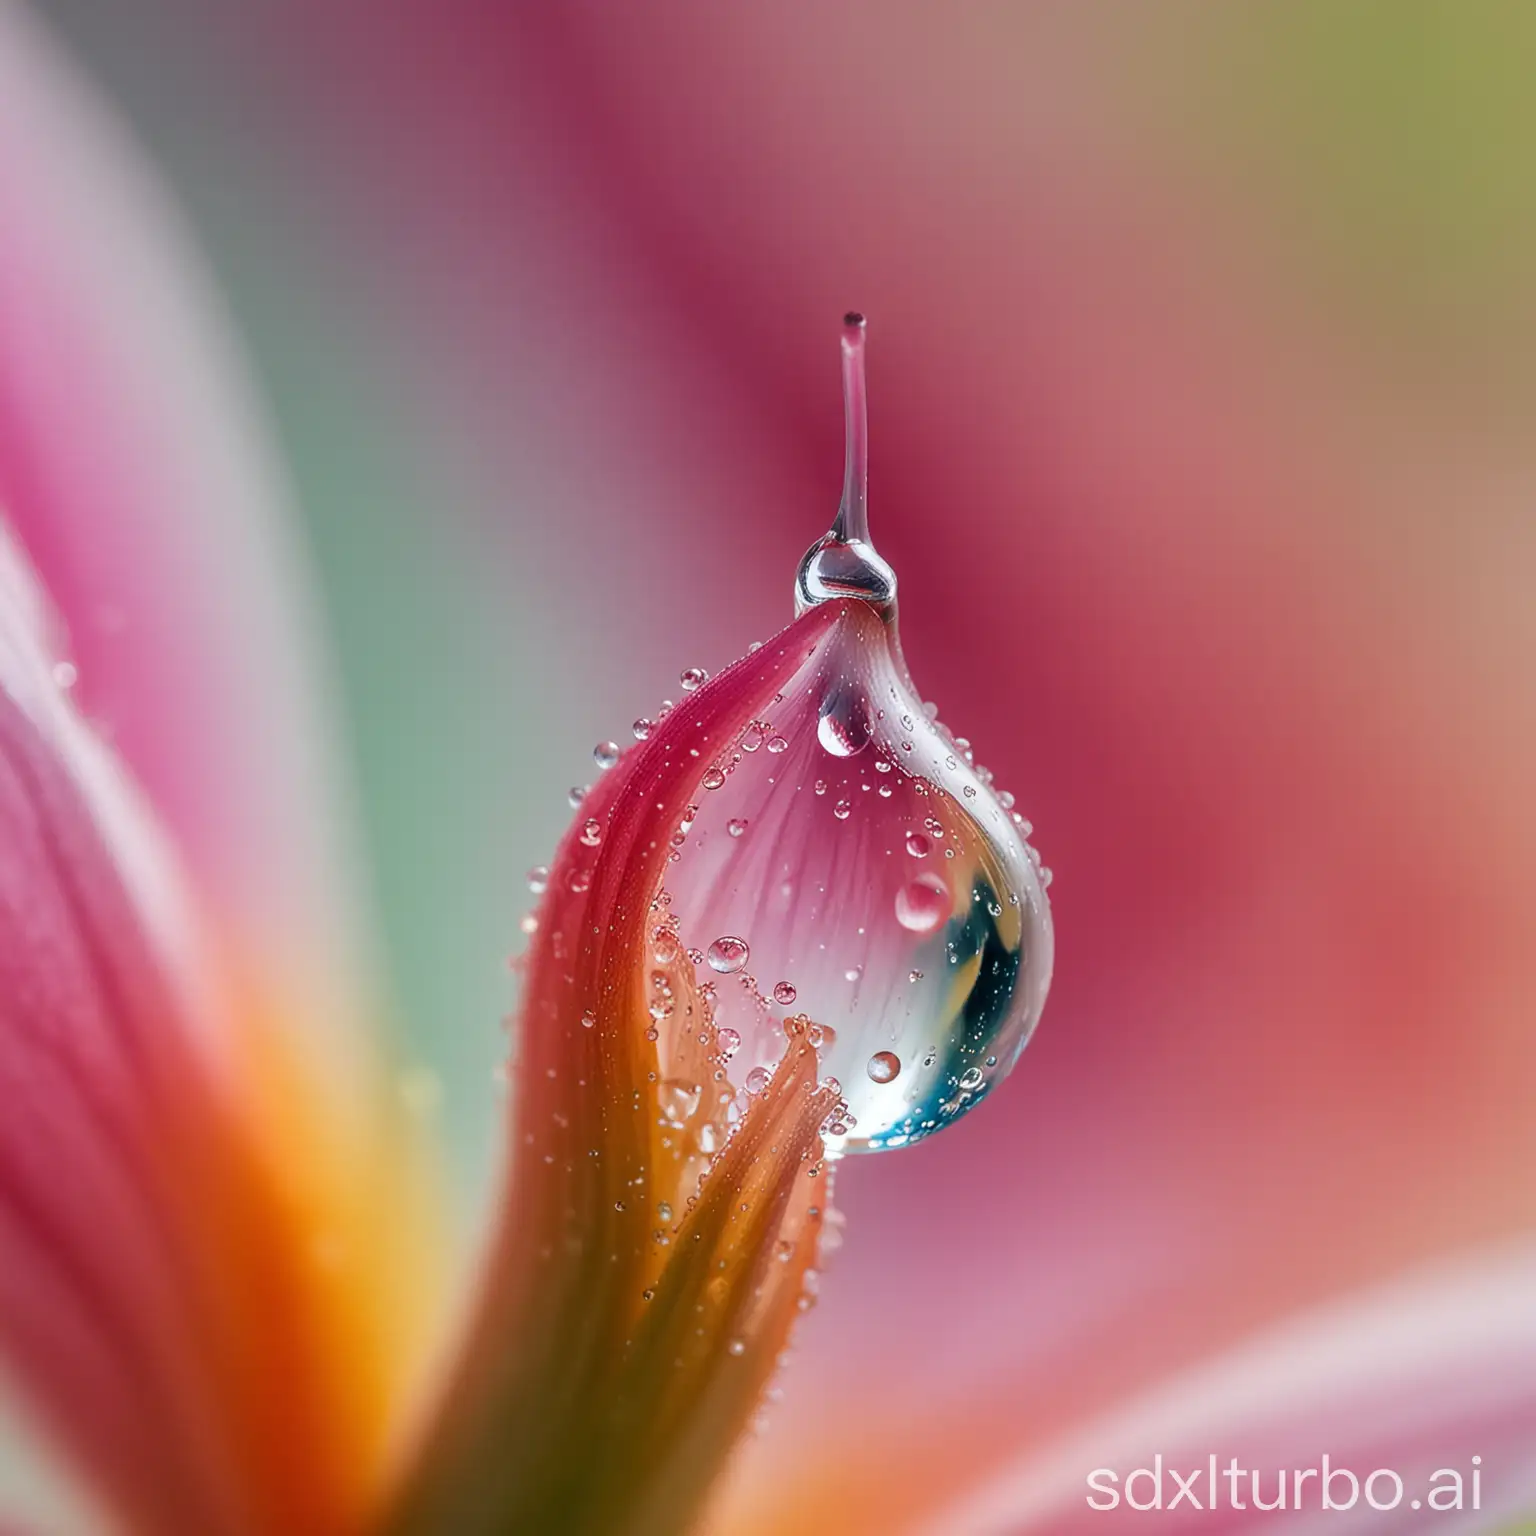 Macro shot of a dewdrop clinging to a delicate, colorful flower petal.